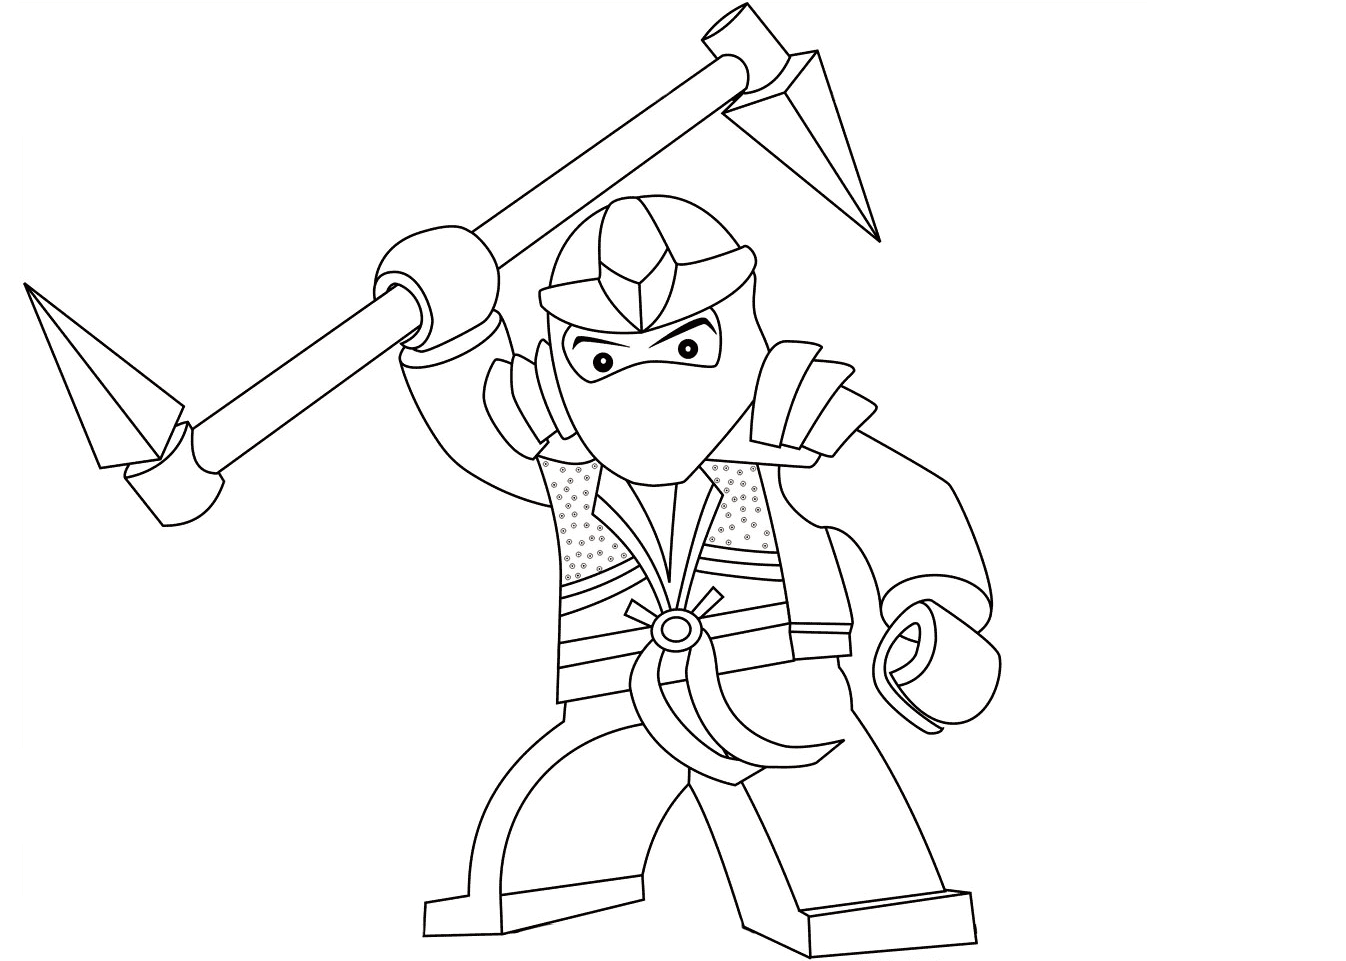 Lego Ninjago Lloyd the Green ninja with the double-bladed scythe Coloring Pages